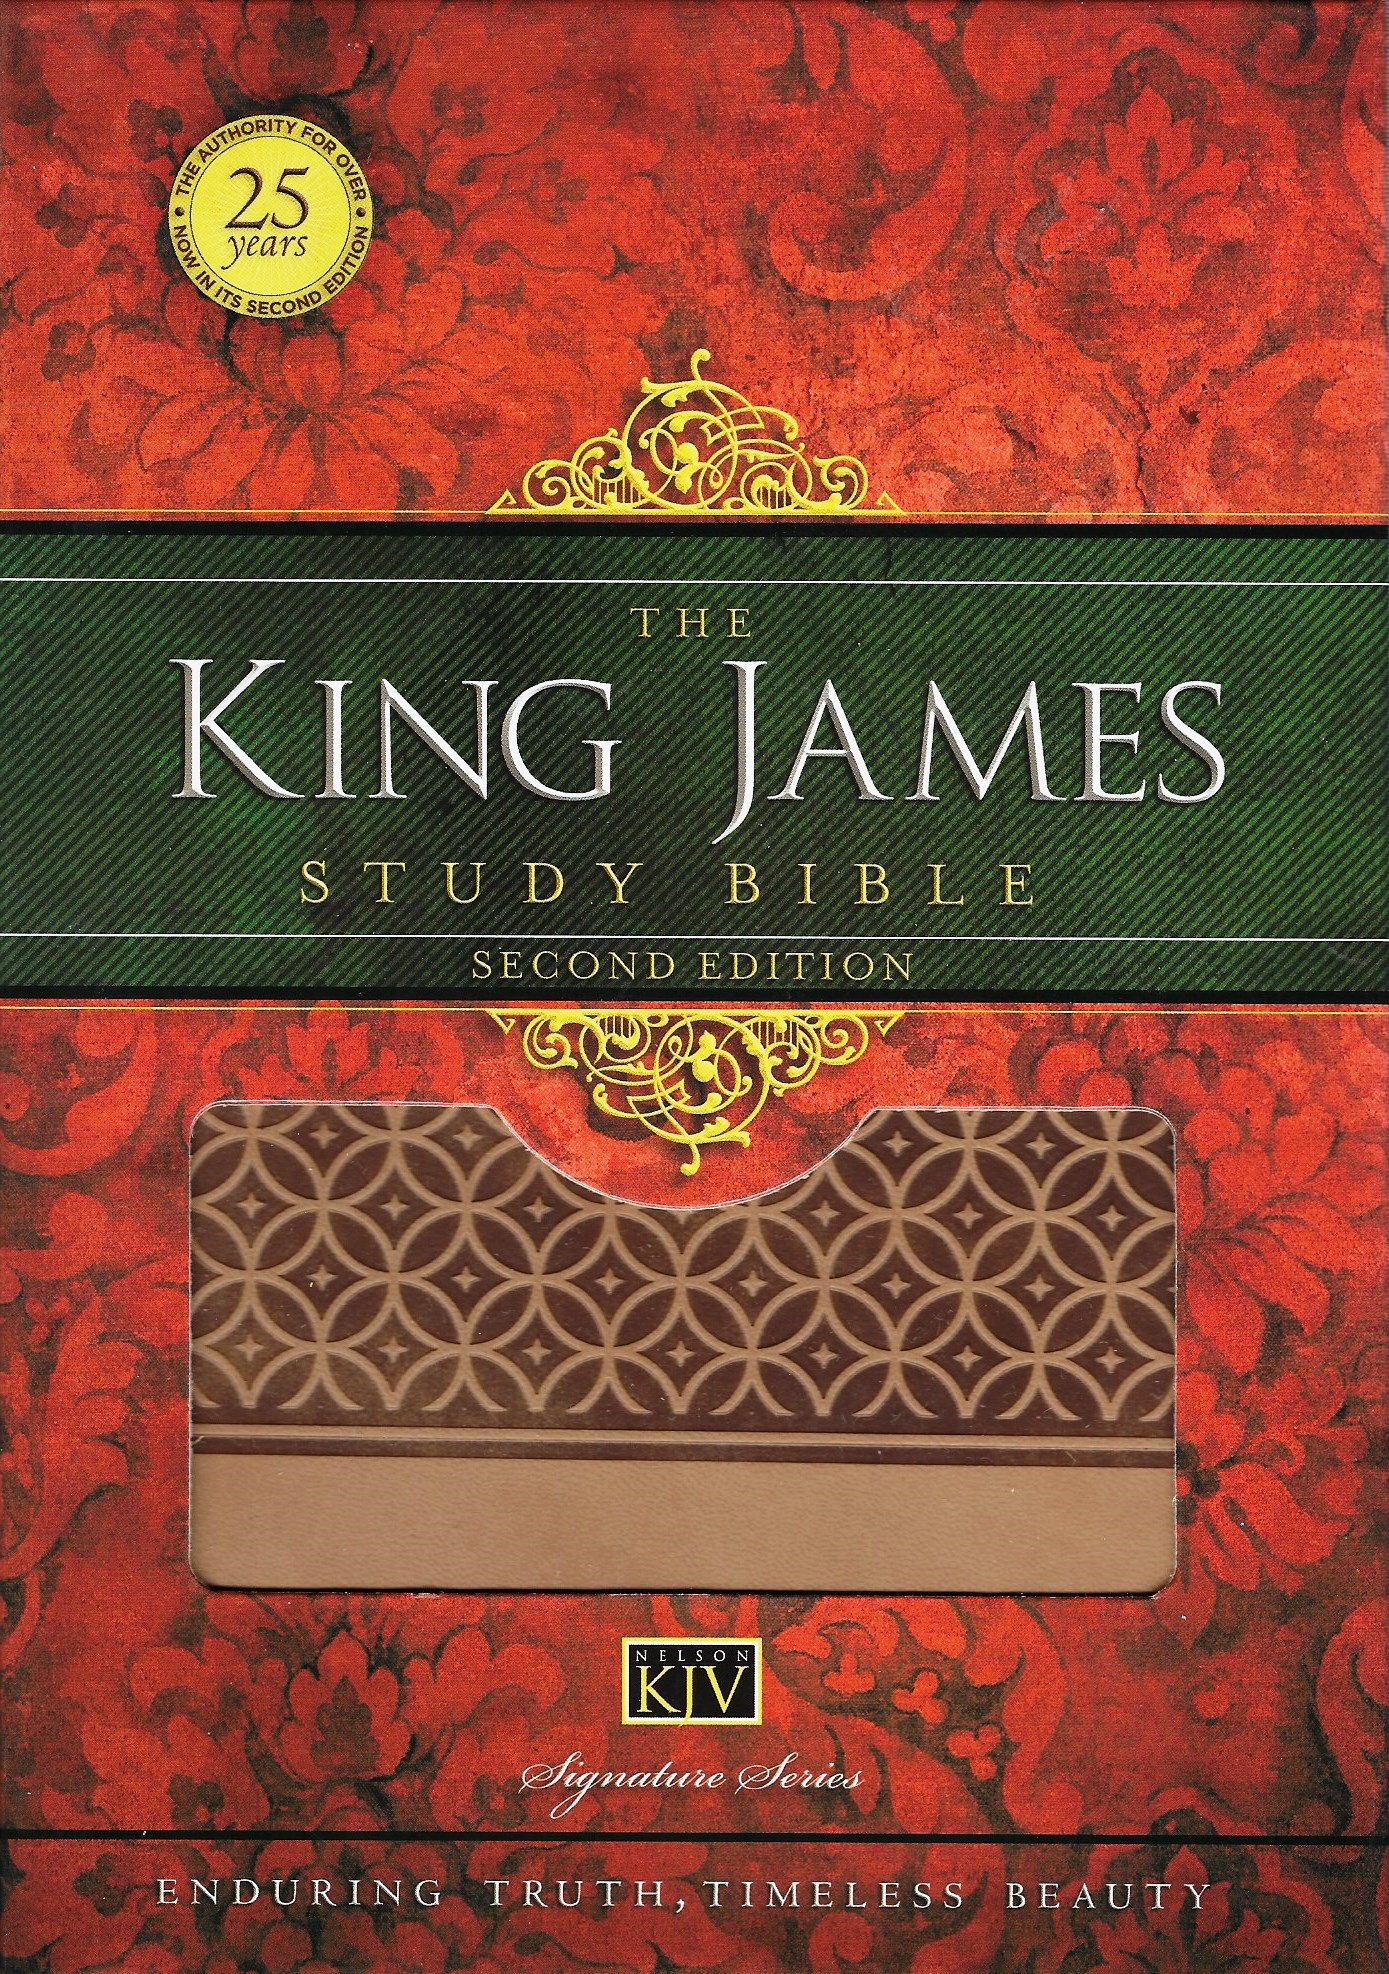 THE KING JAMES STUDY BIBLE Second Edition